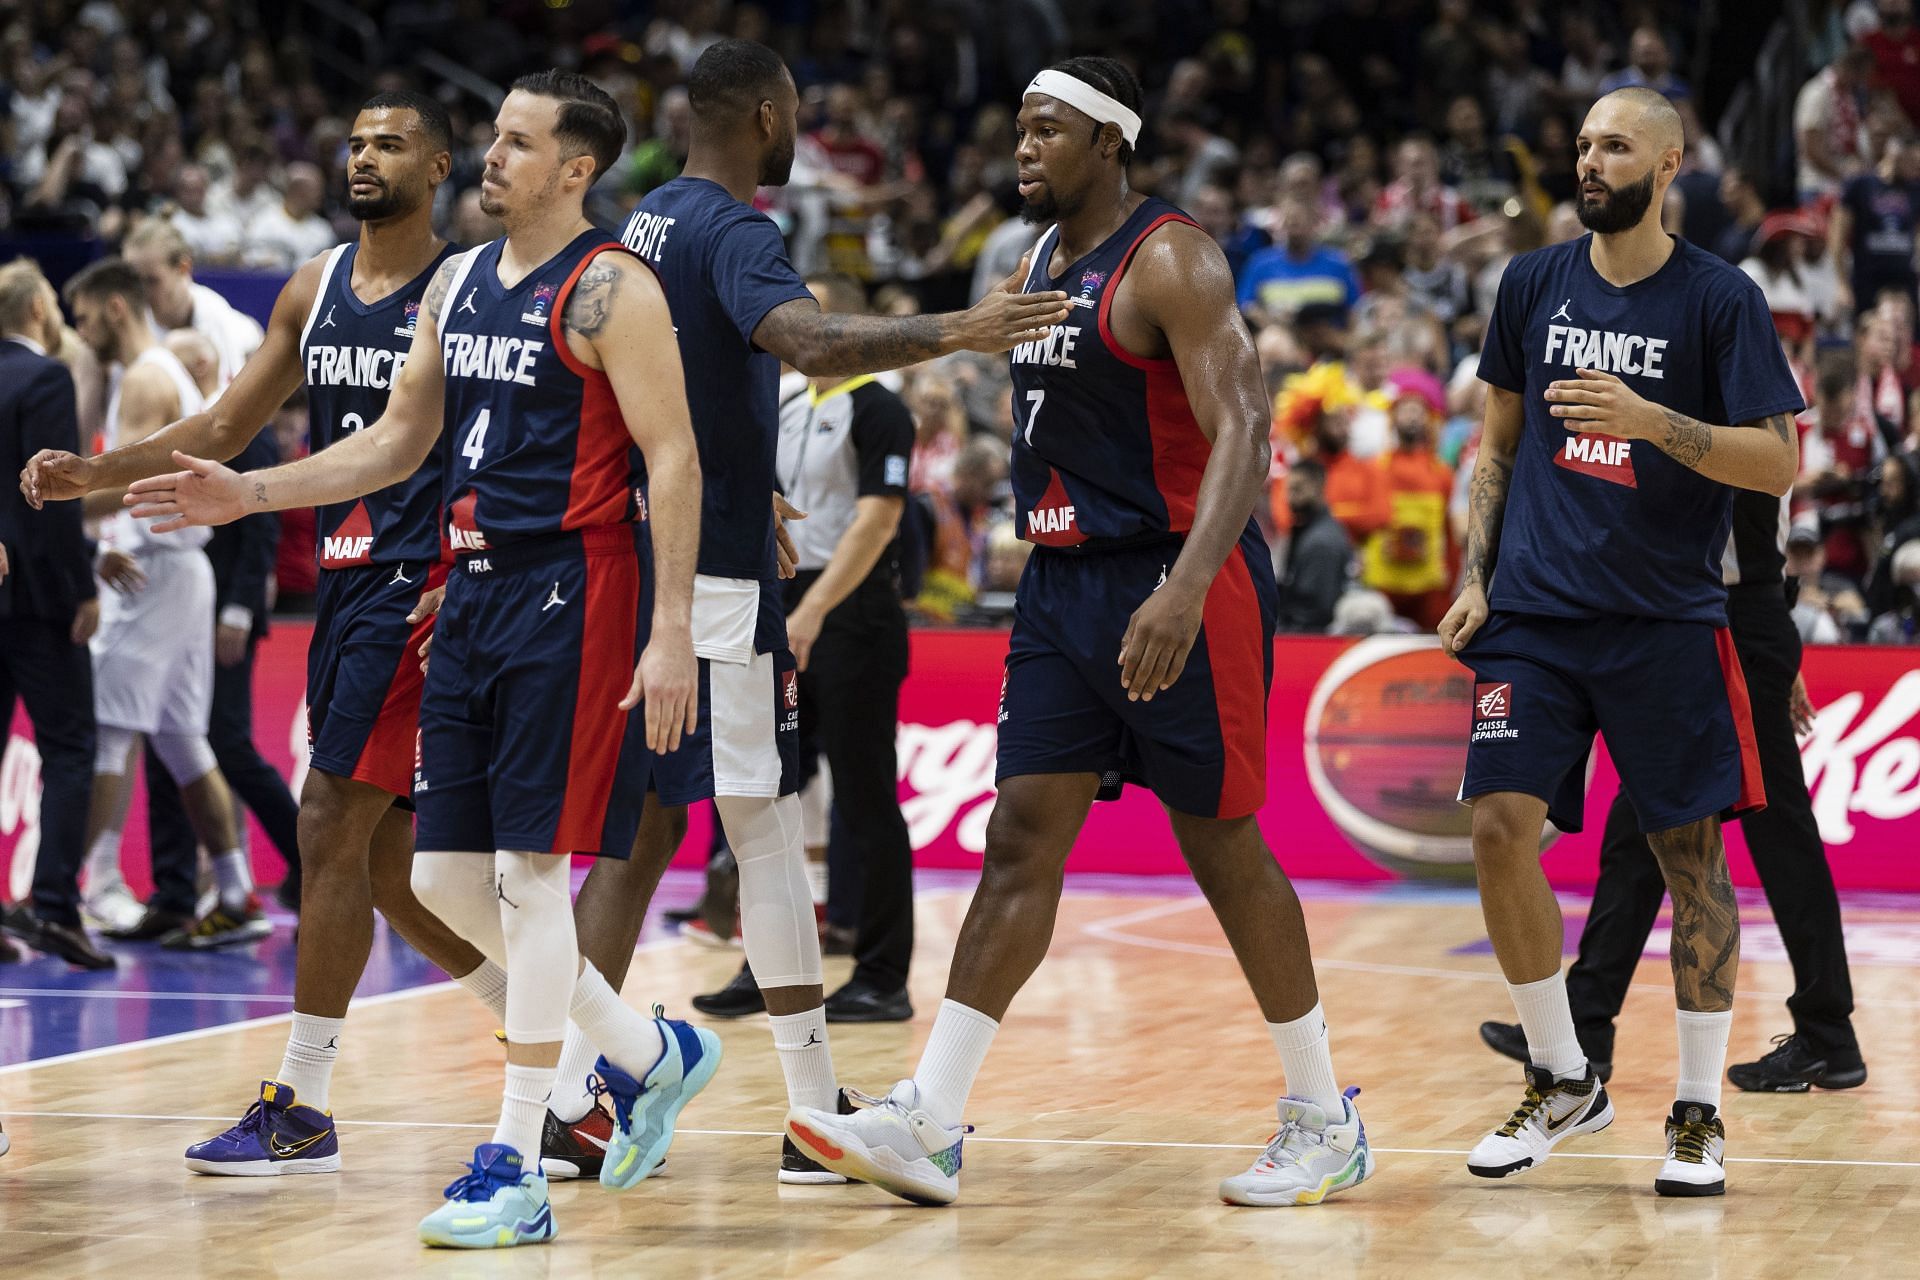 Guerschon Yabusele is expected to be key for France at the FIBA World Cup